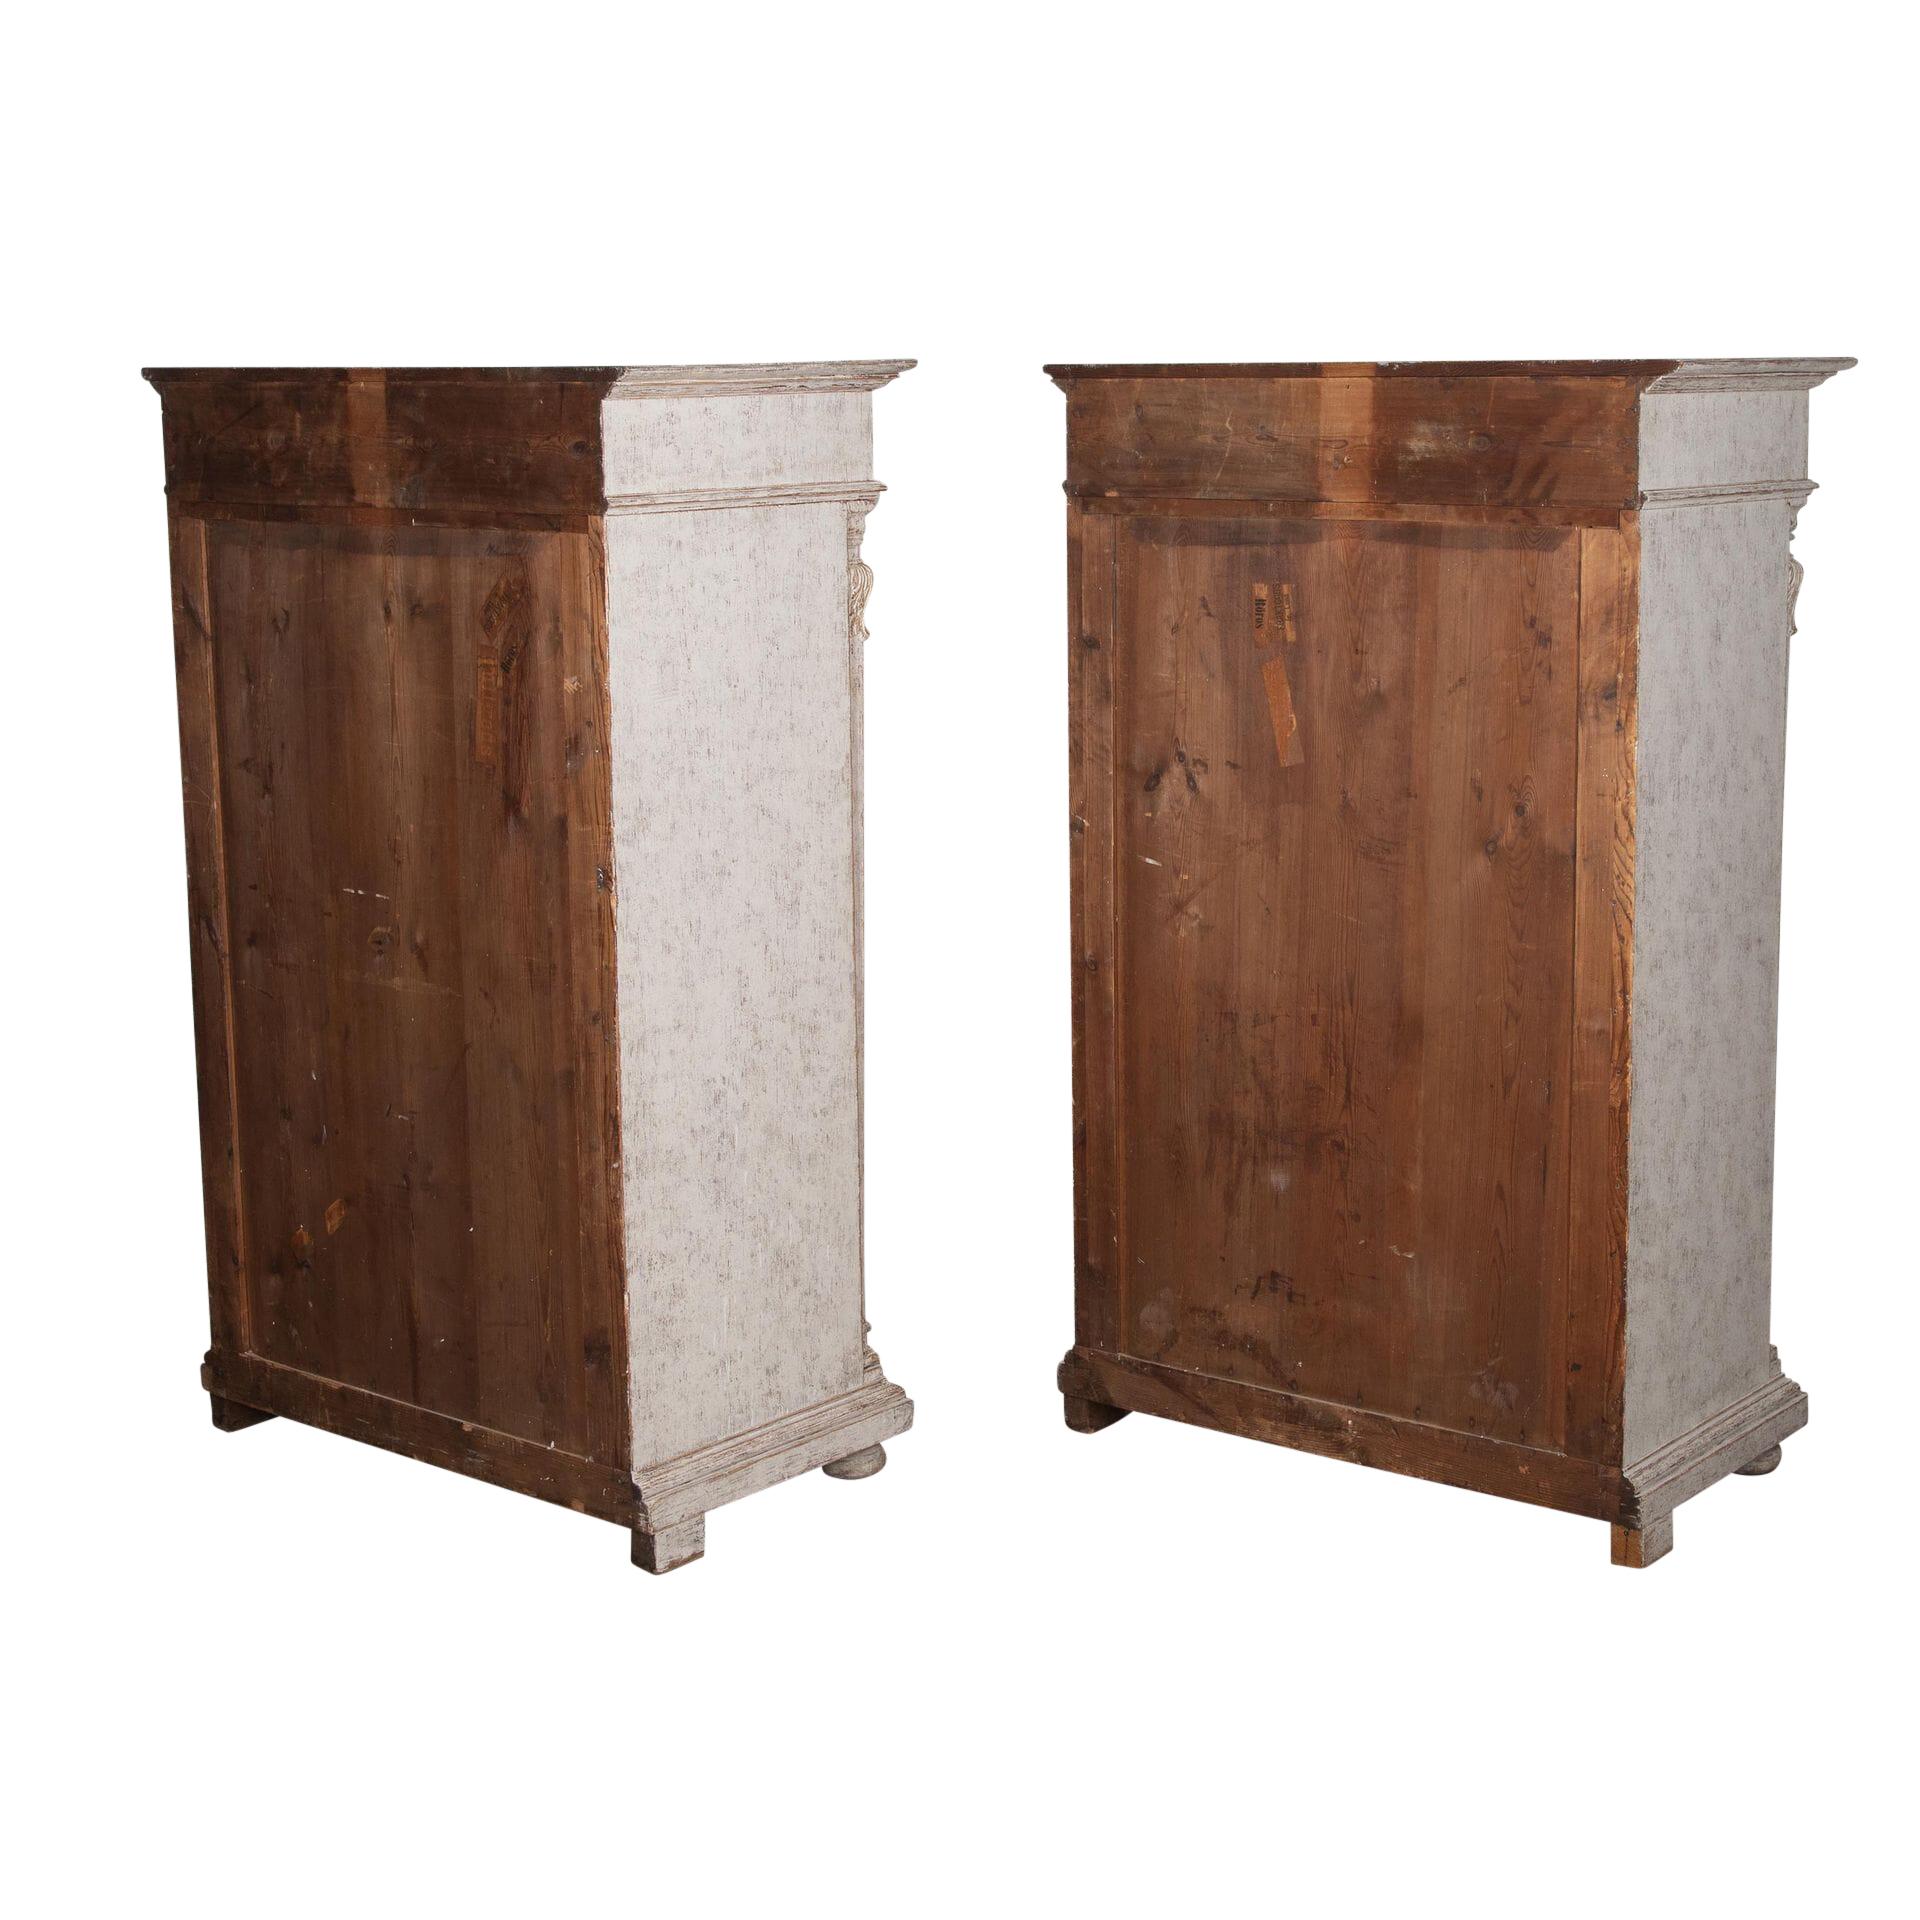 Pair of 19th Century Swedish cabinets.
With decorative carved detailing.
Featuring a top storage drawer and below is a large single door to opening to useful shelf storage.